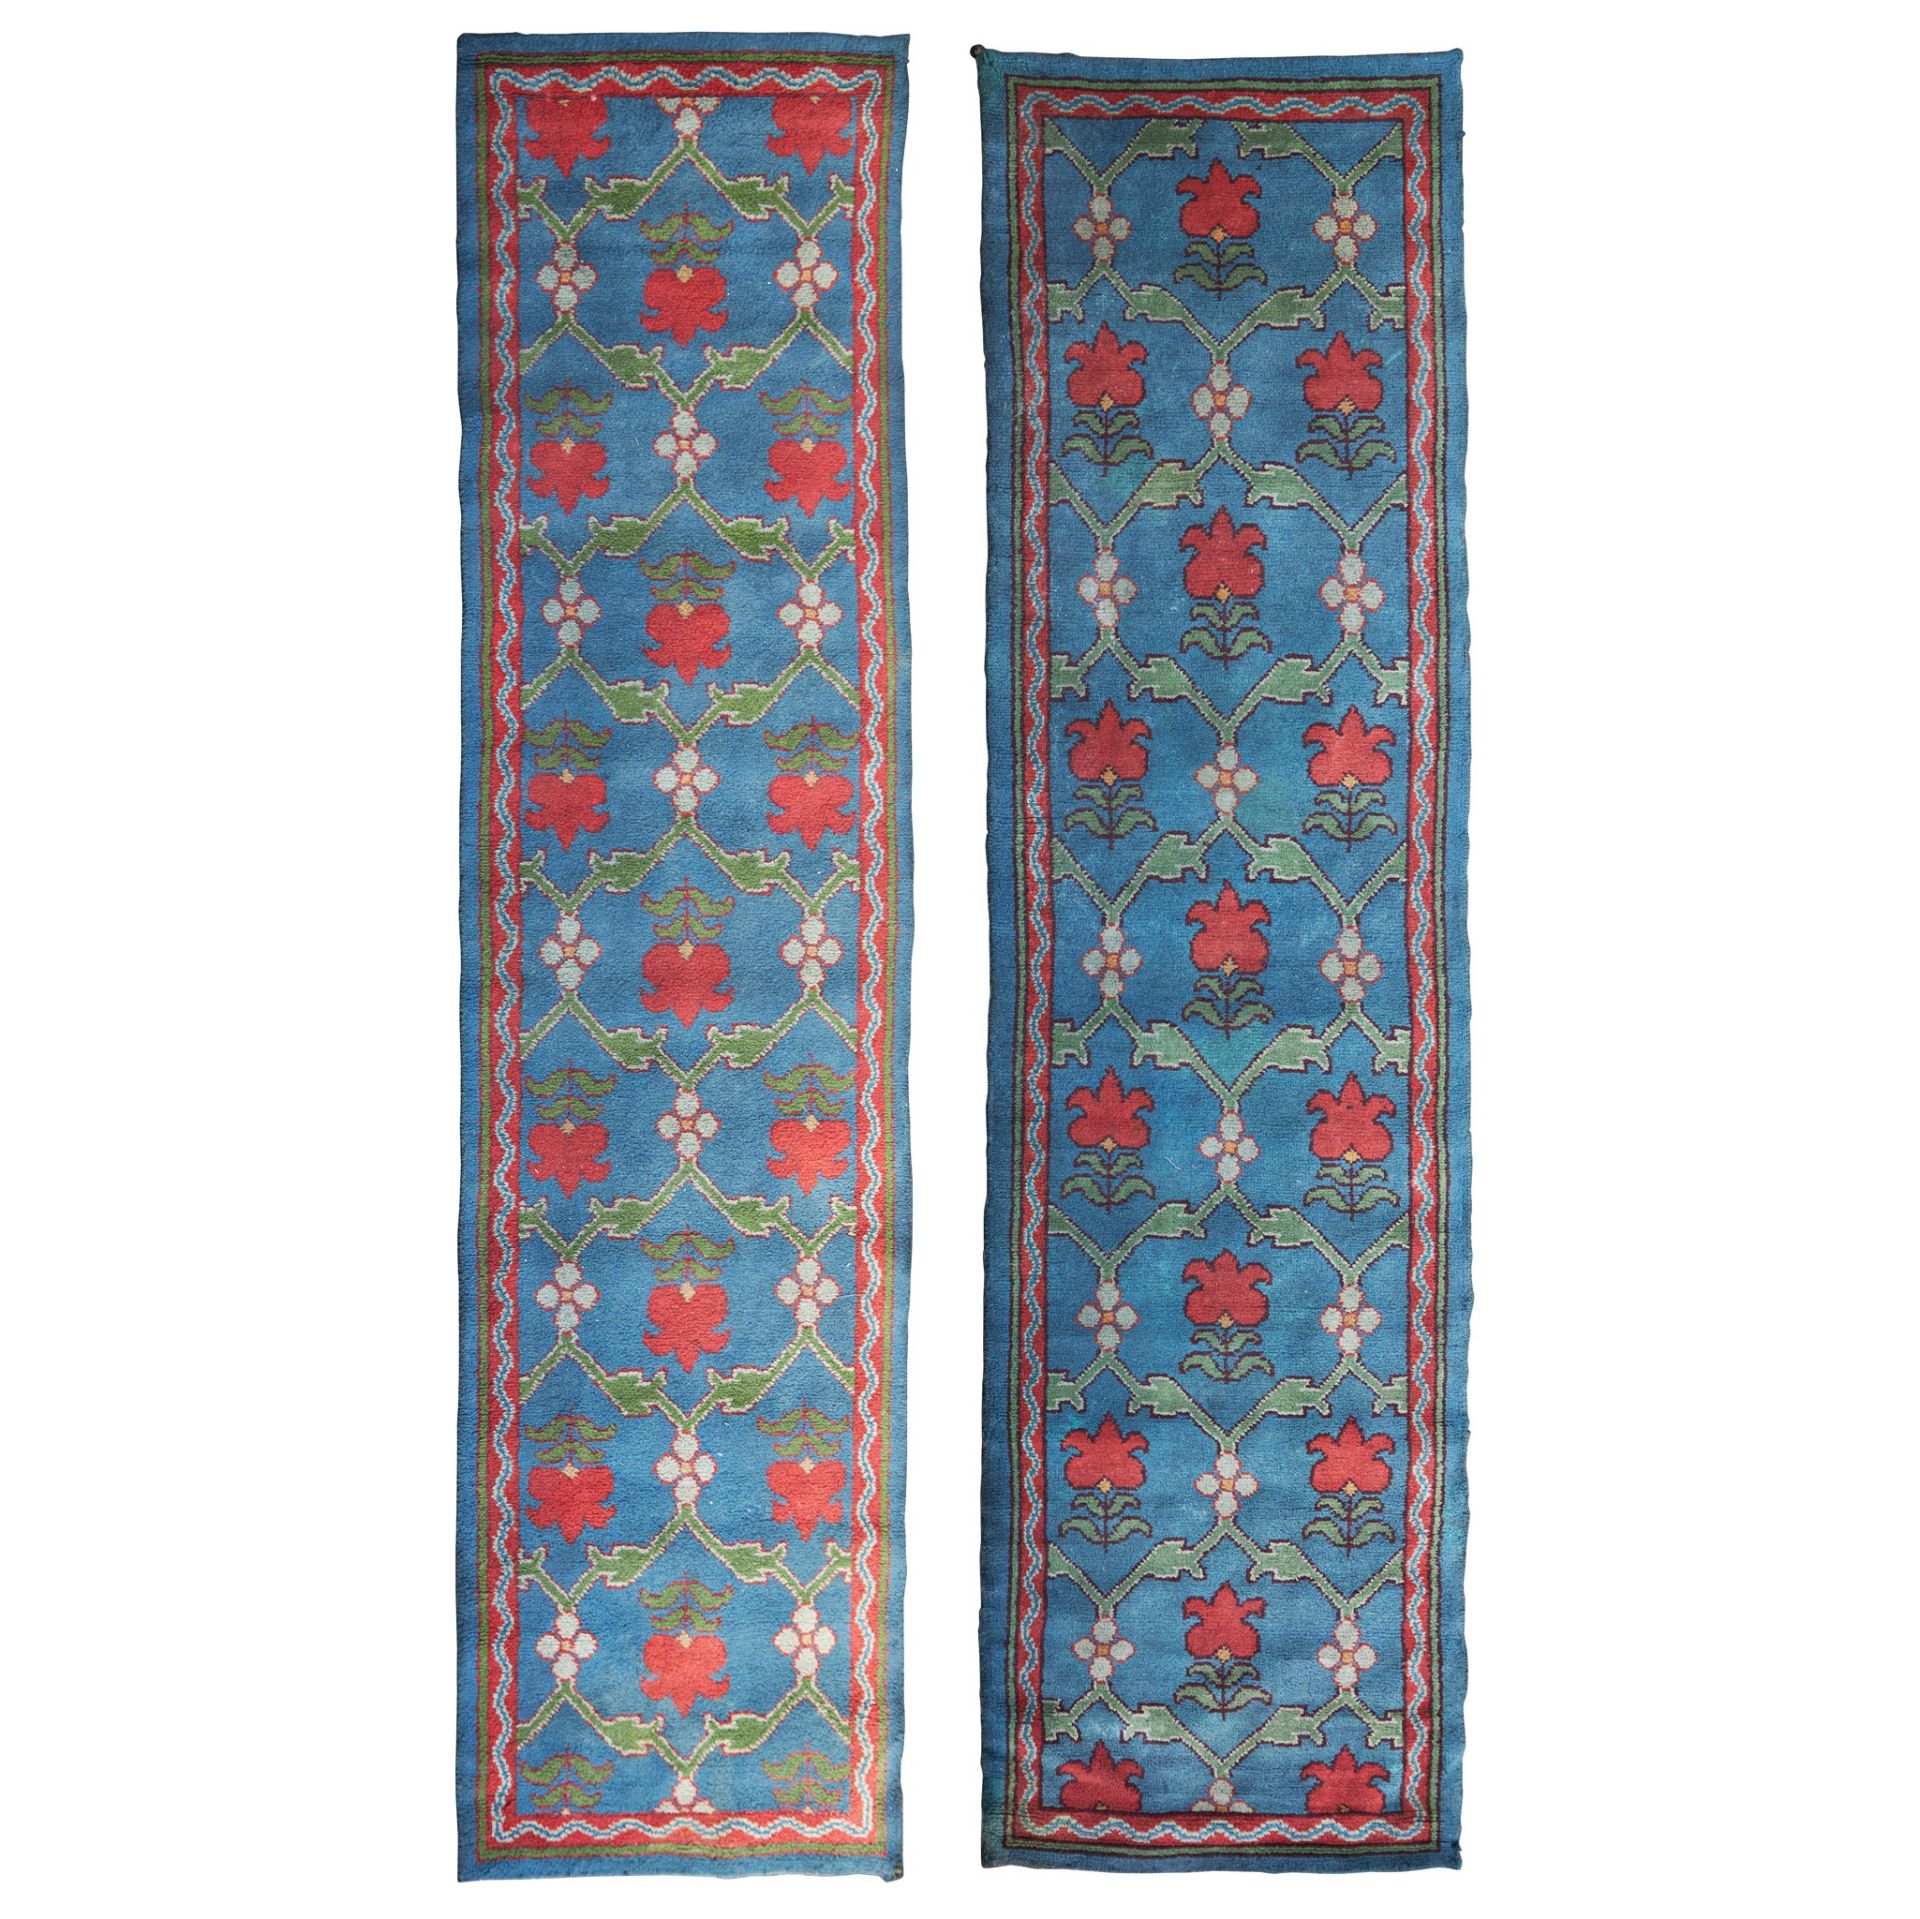 ATTRIBUTED TO ALEXANDER MORTON AND CO. PAIR OF ARTS & CRAFTS DONEGAL RUNNERS, CIRCA 1910